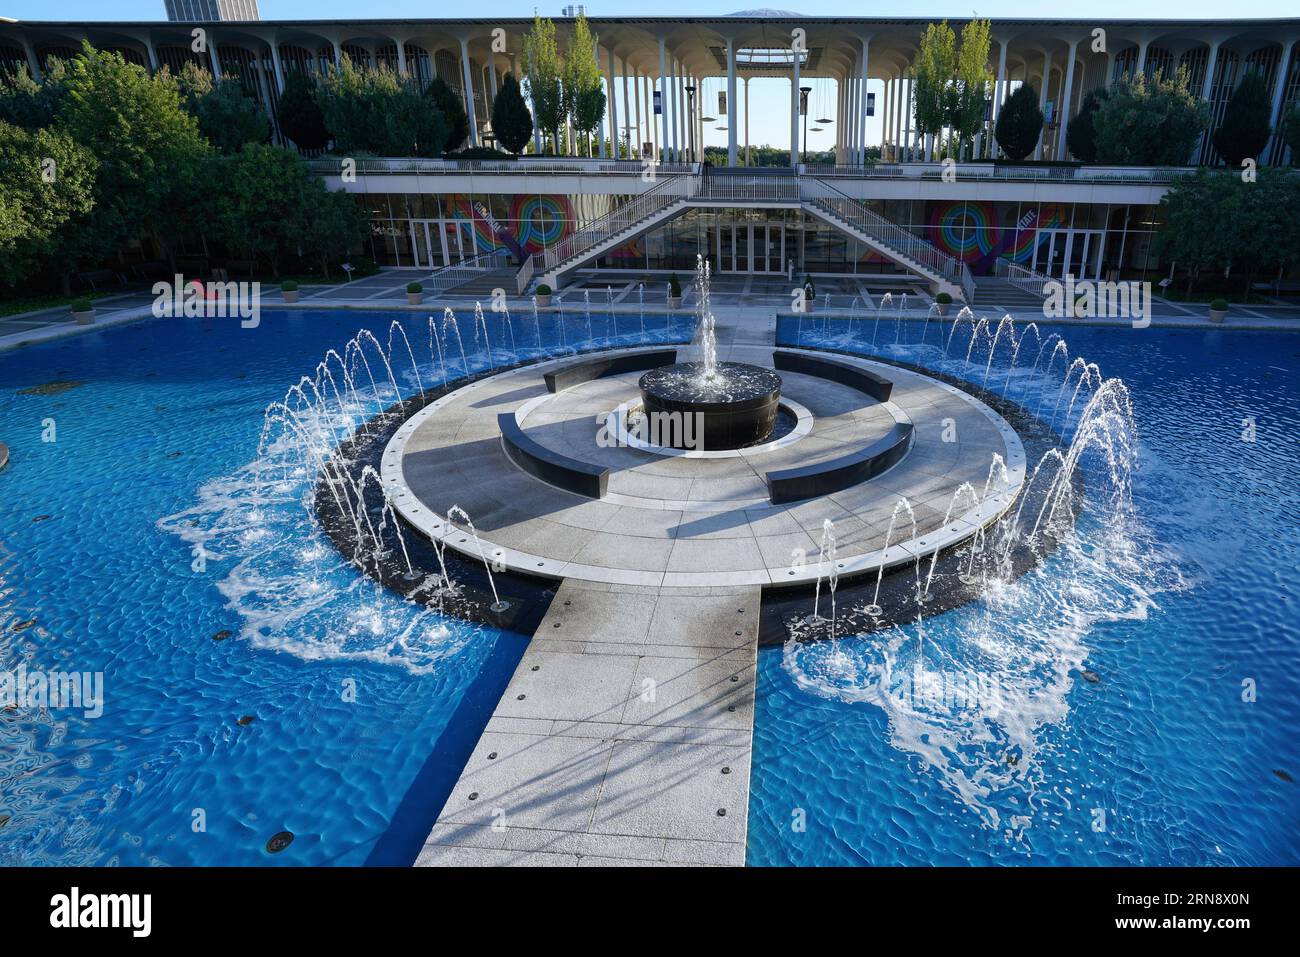 State University of New York at Albany, modern architecture, fountain at grand entrance plaza Stock Photo